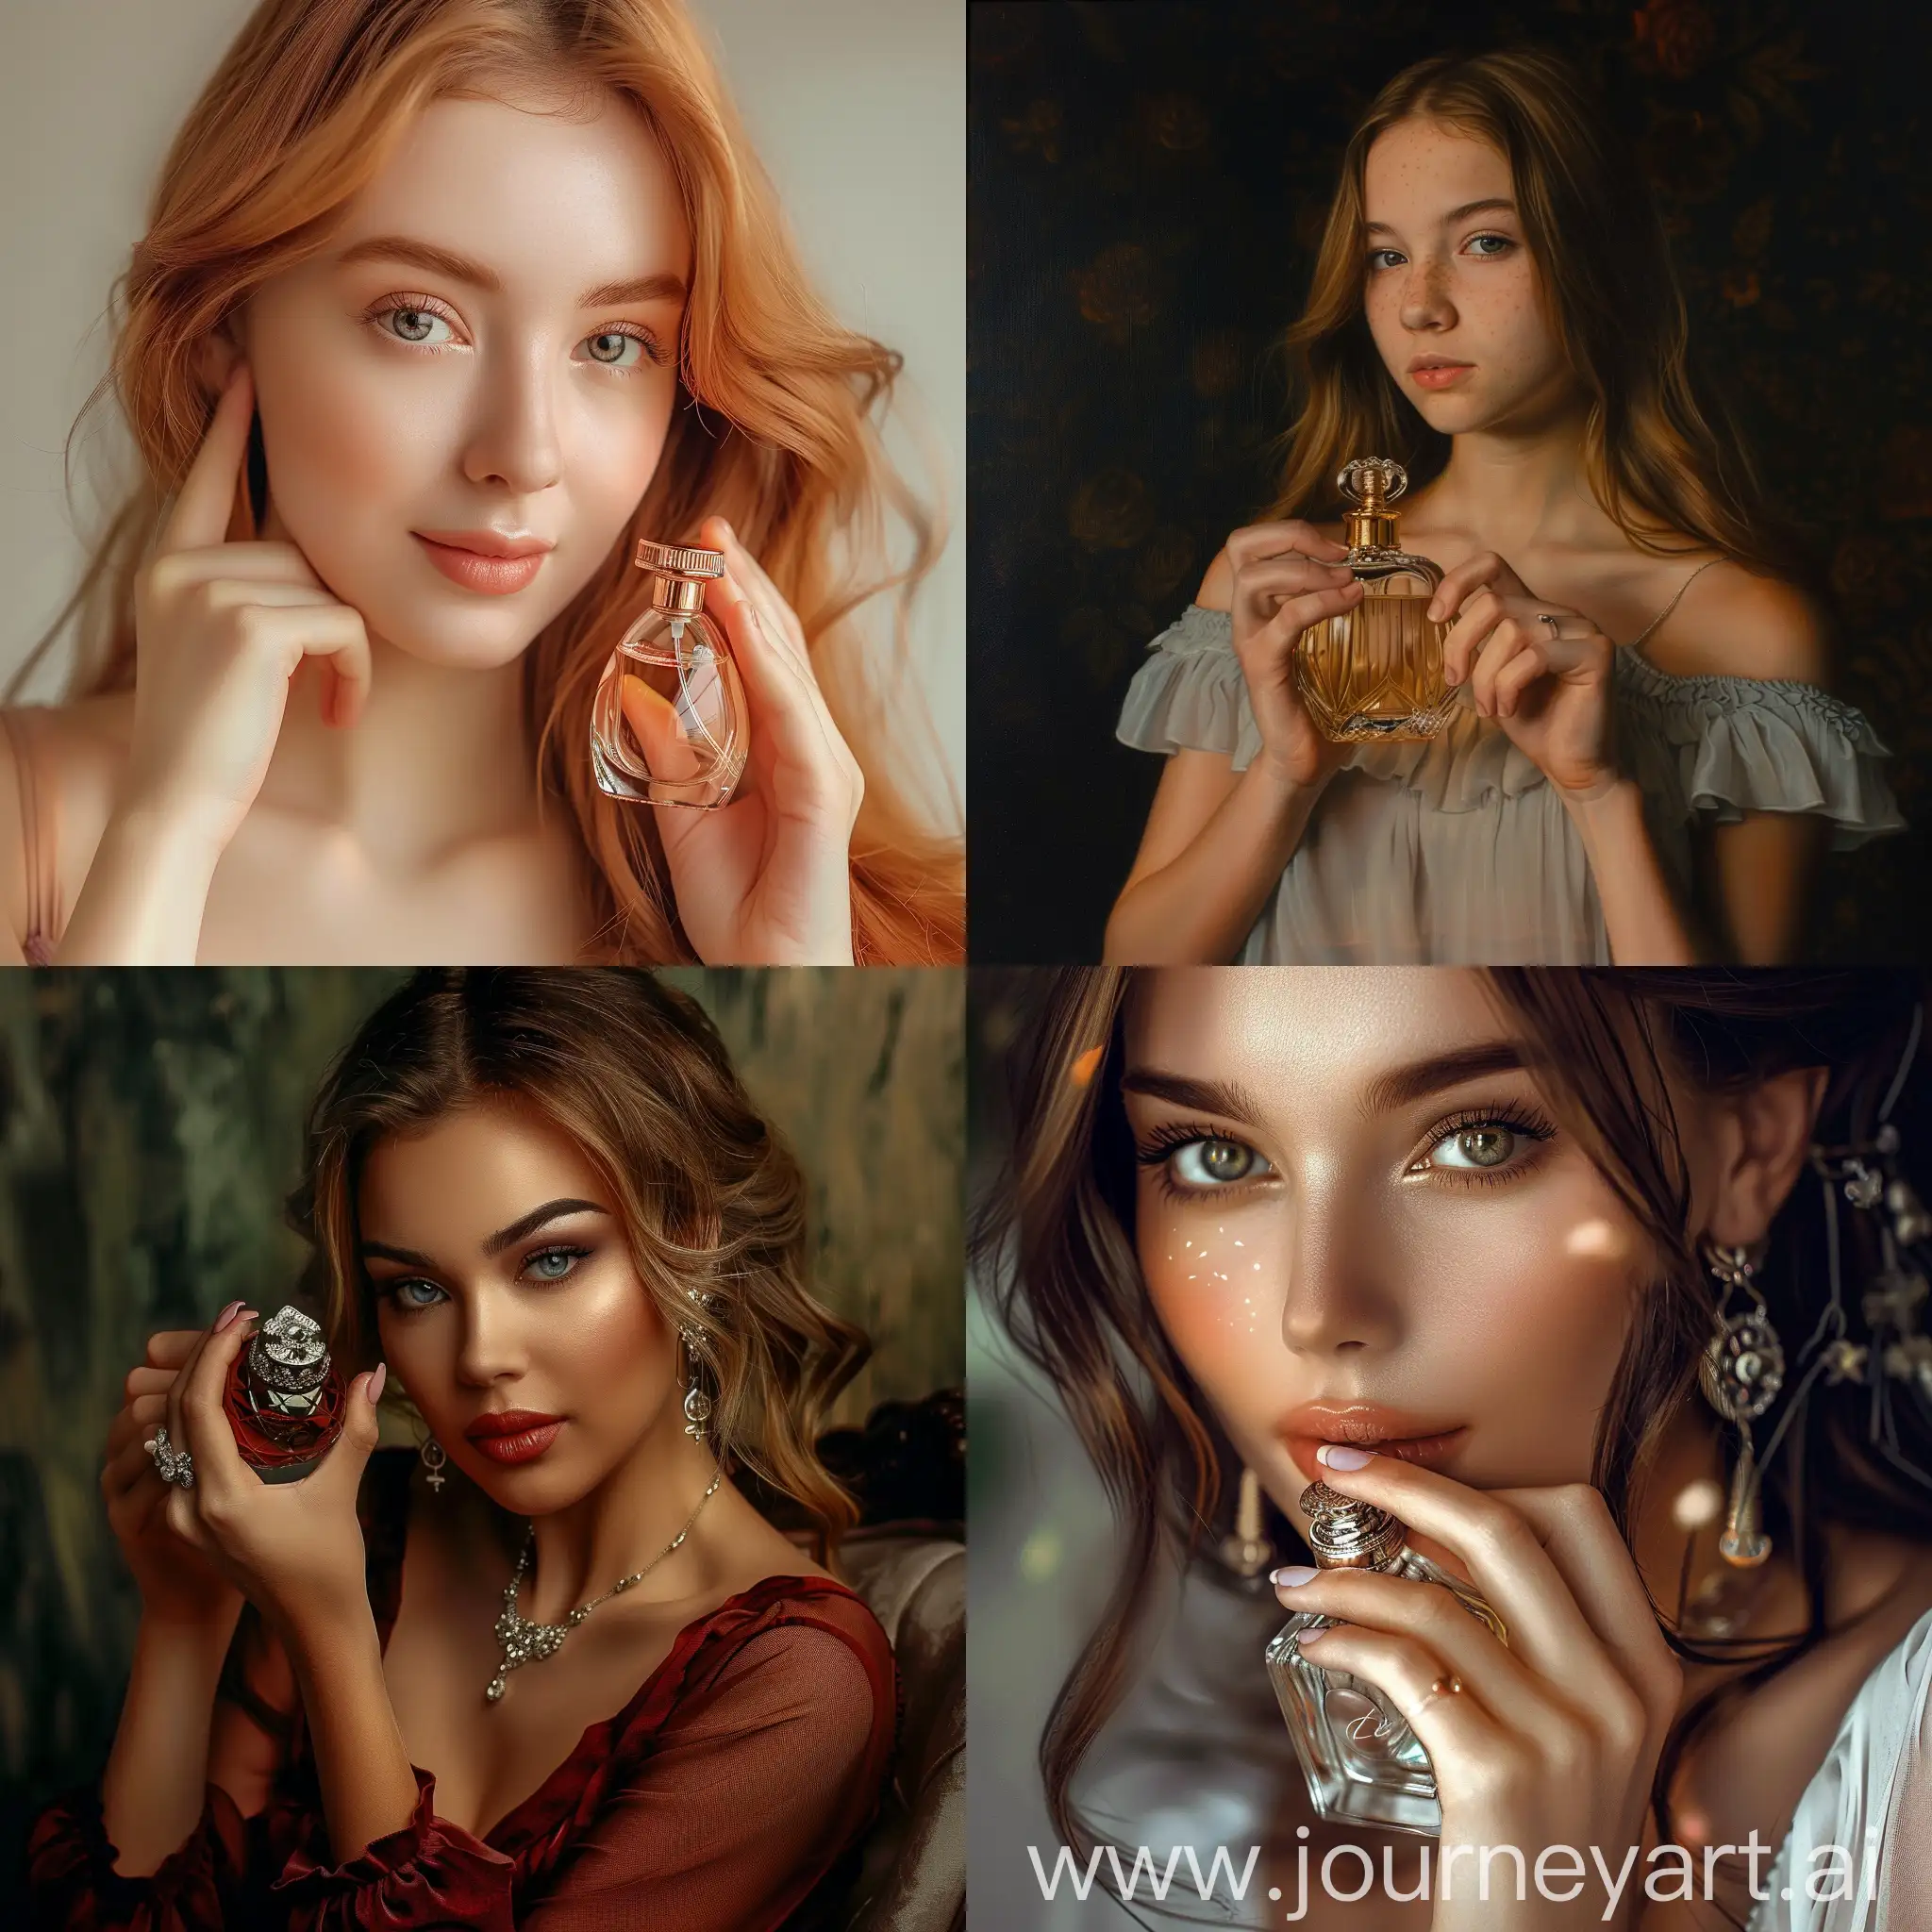 Beautiful-Girl-Holding-Perfume-Bottle-with-Pressed-Cap-Portrait